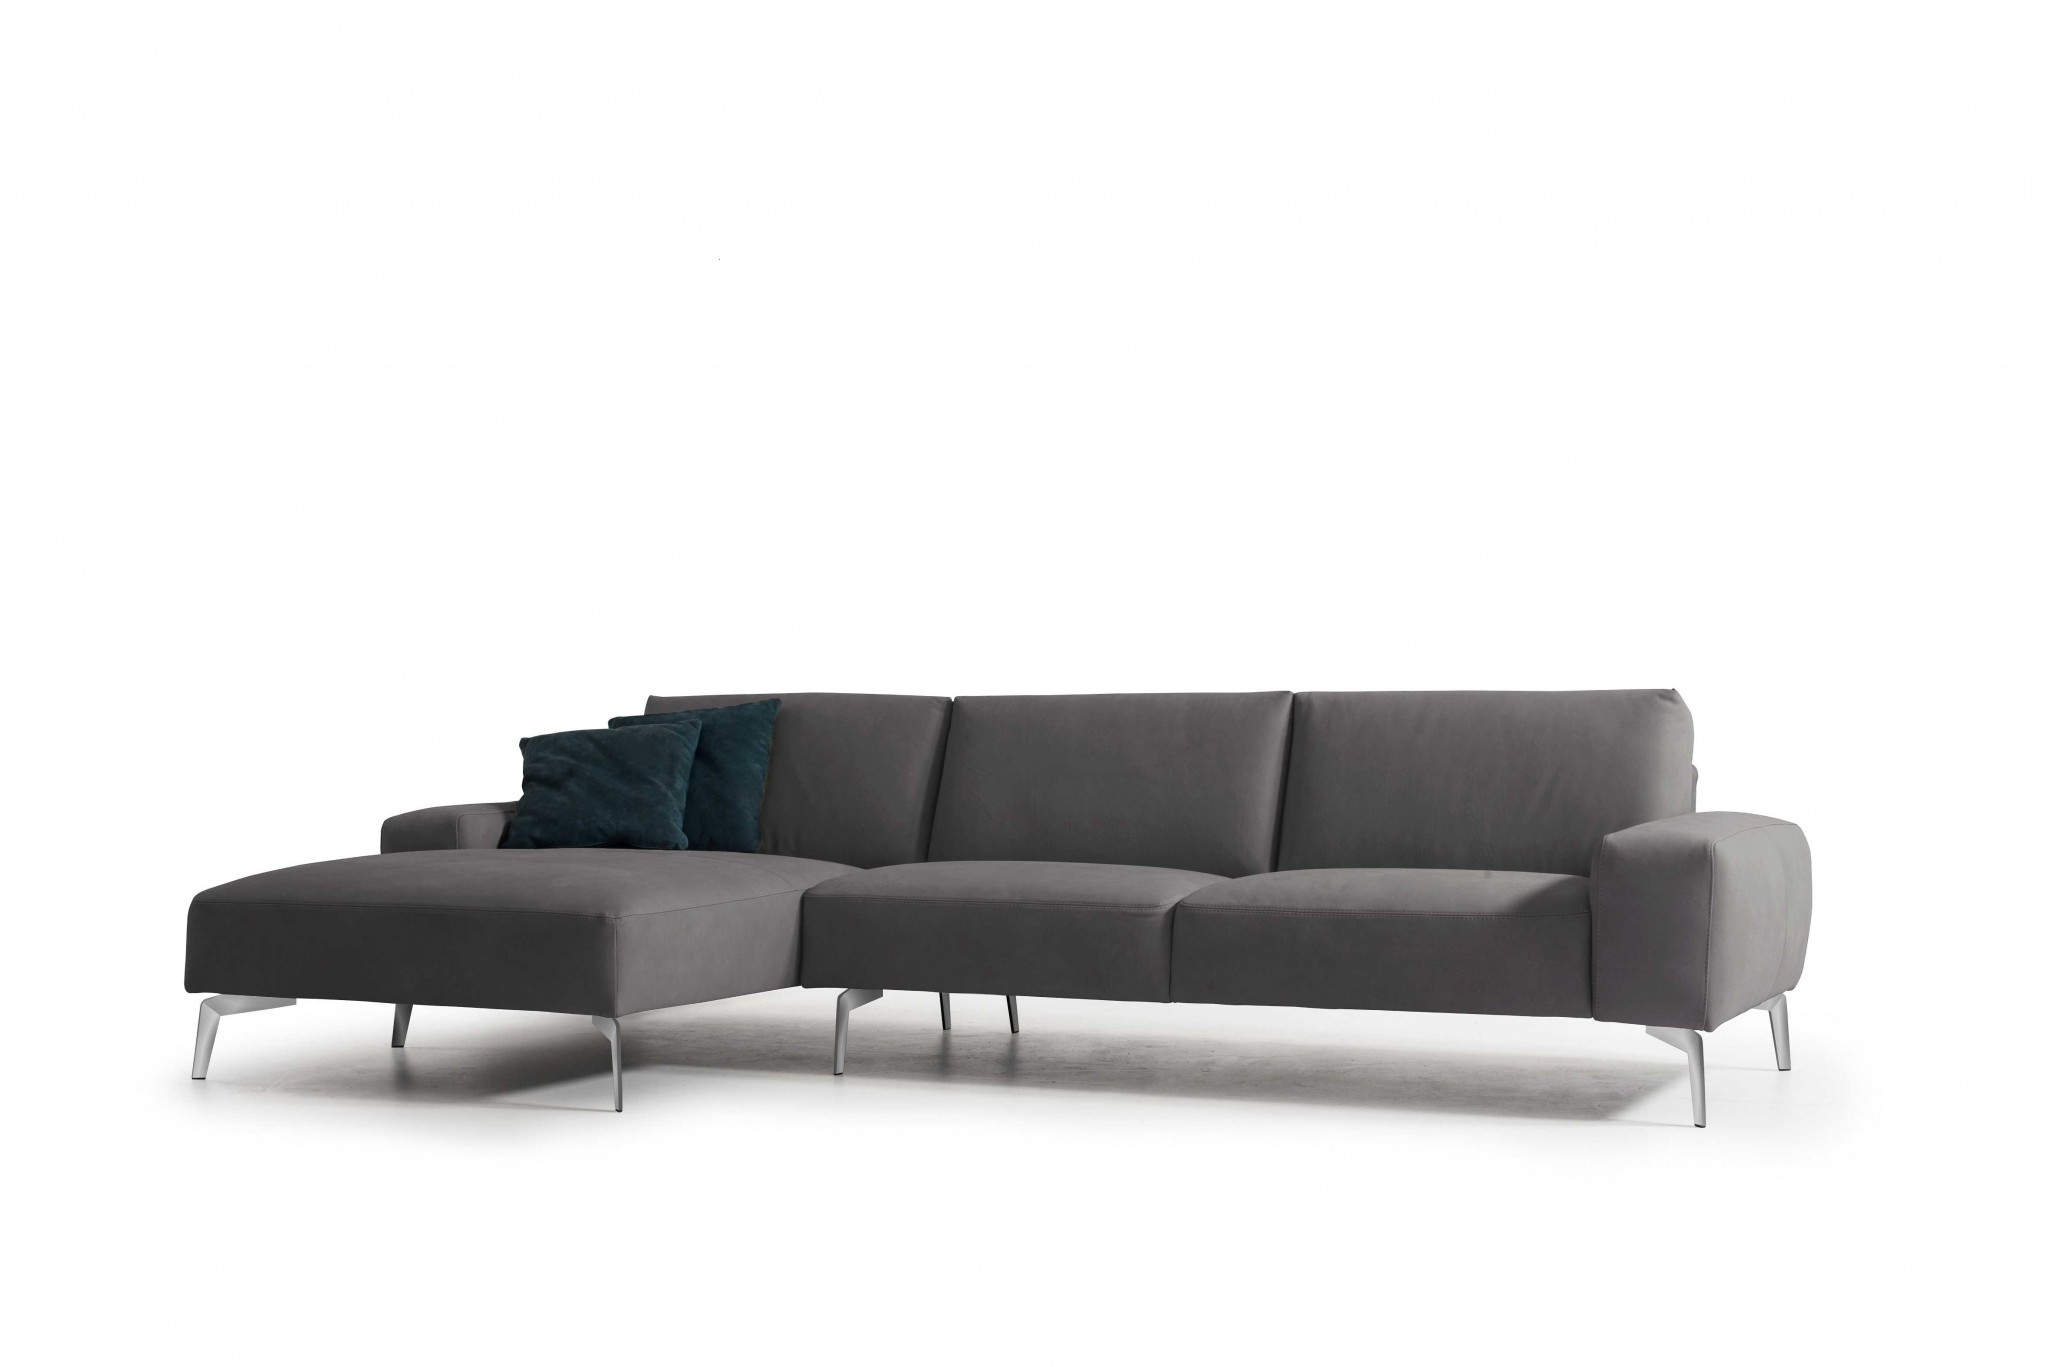 122" X 67" X 33" Dark Gray Leather Sectional